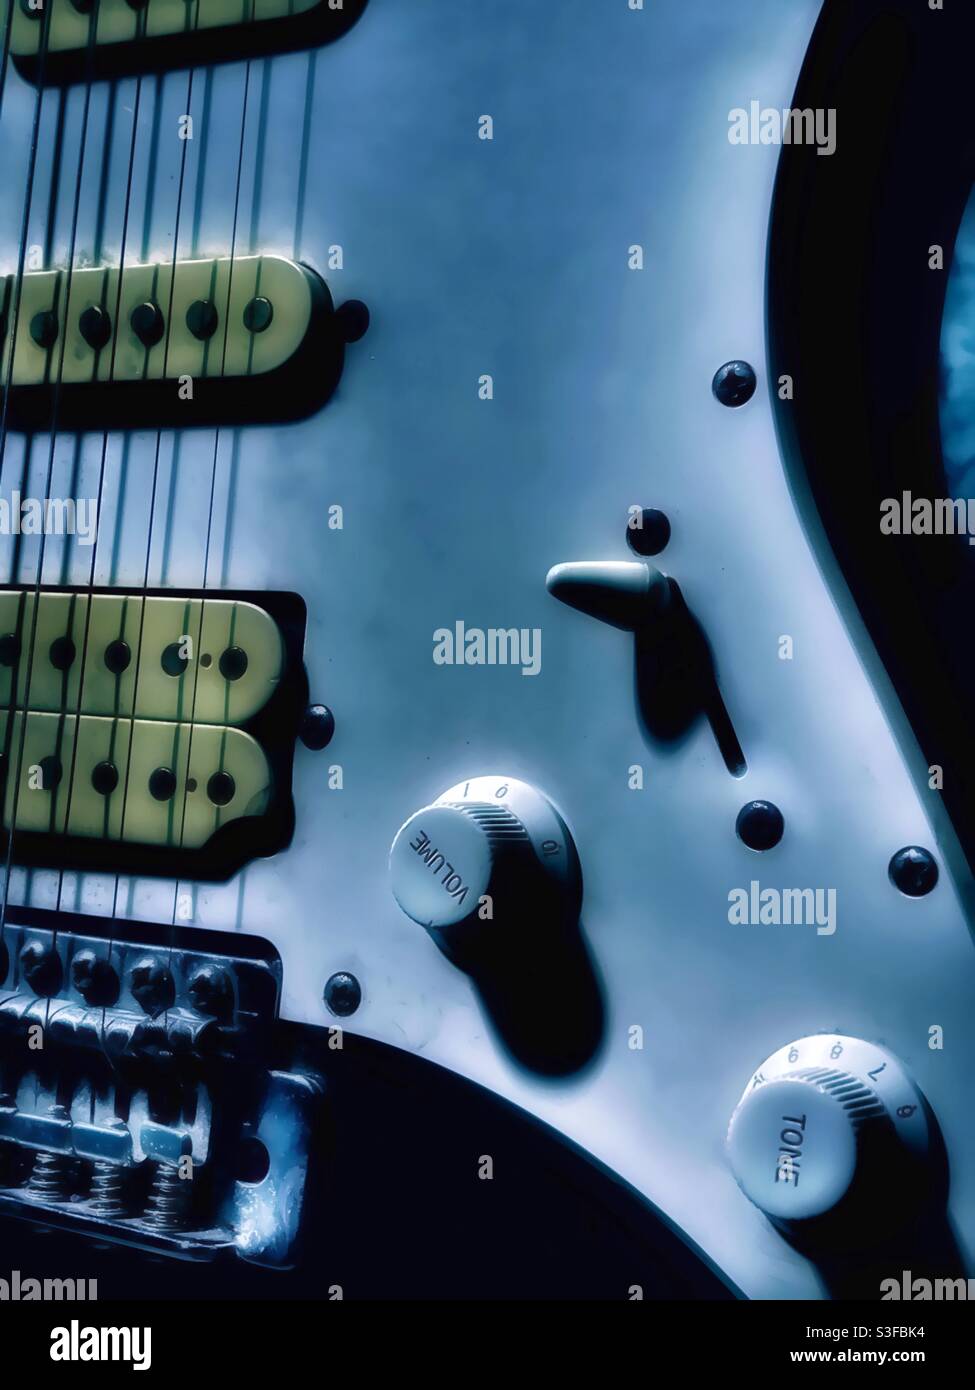 Moody image of an old electric guitar Stock Photo